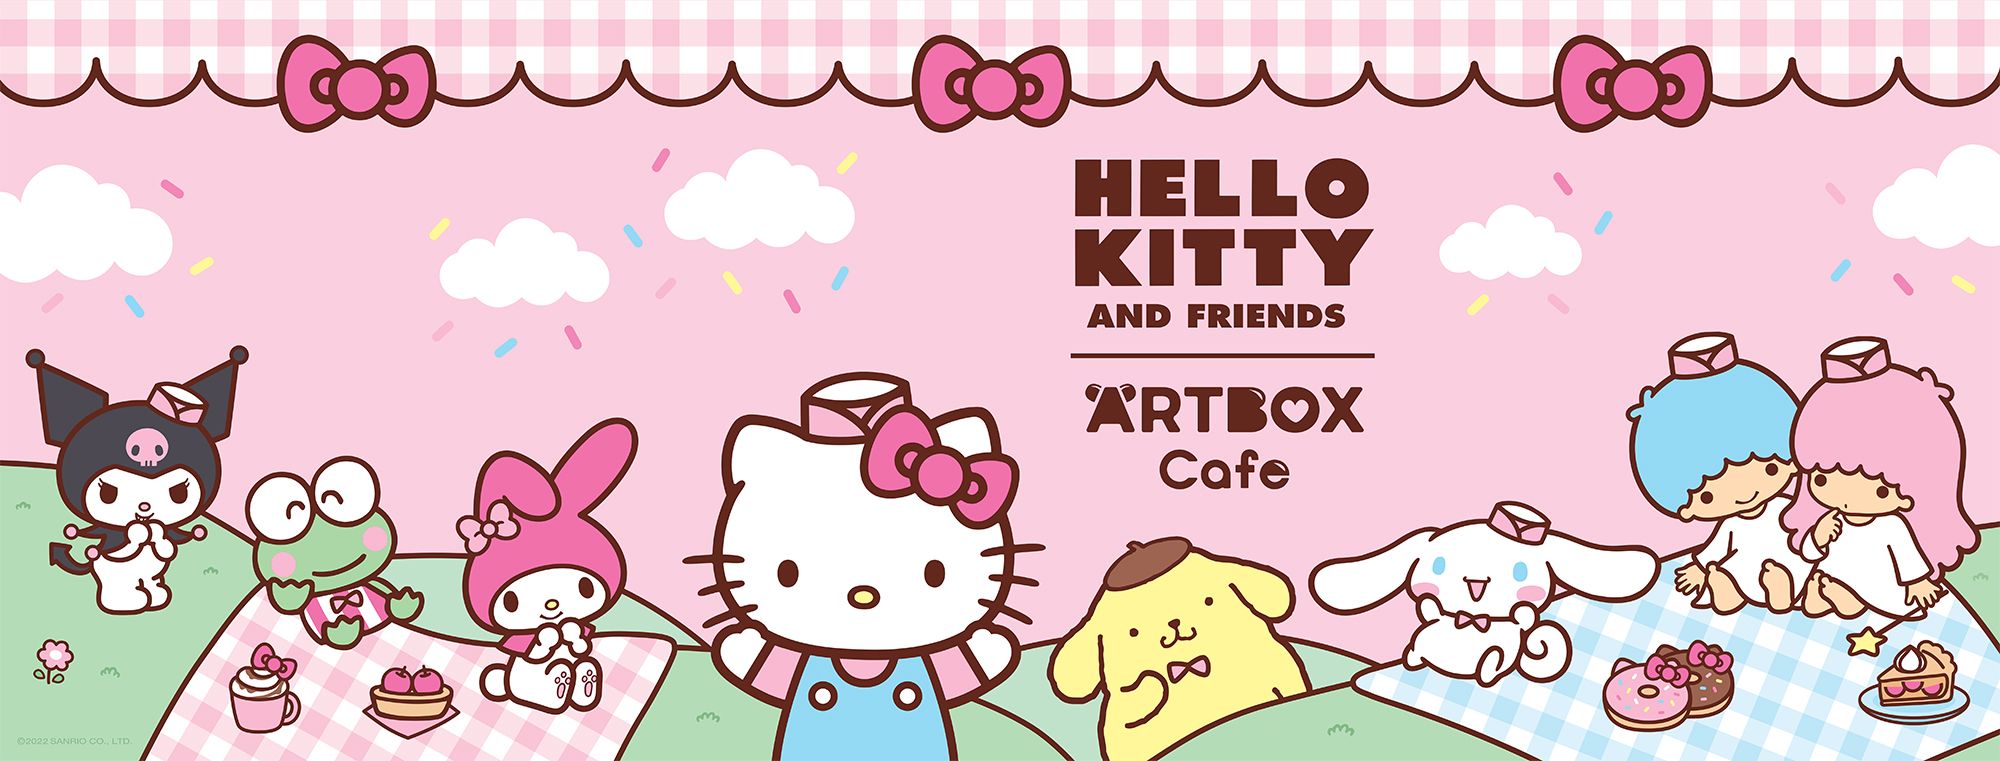 ARTBOX Cafe are so excited to introduce the new resident of ARTBOX Cafe in Brighton The icon that is Hello Kitty will be joining us from 14th May!